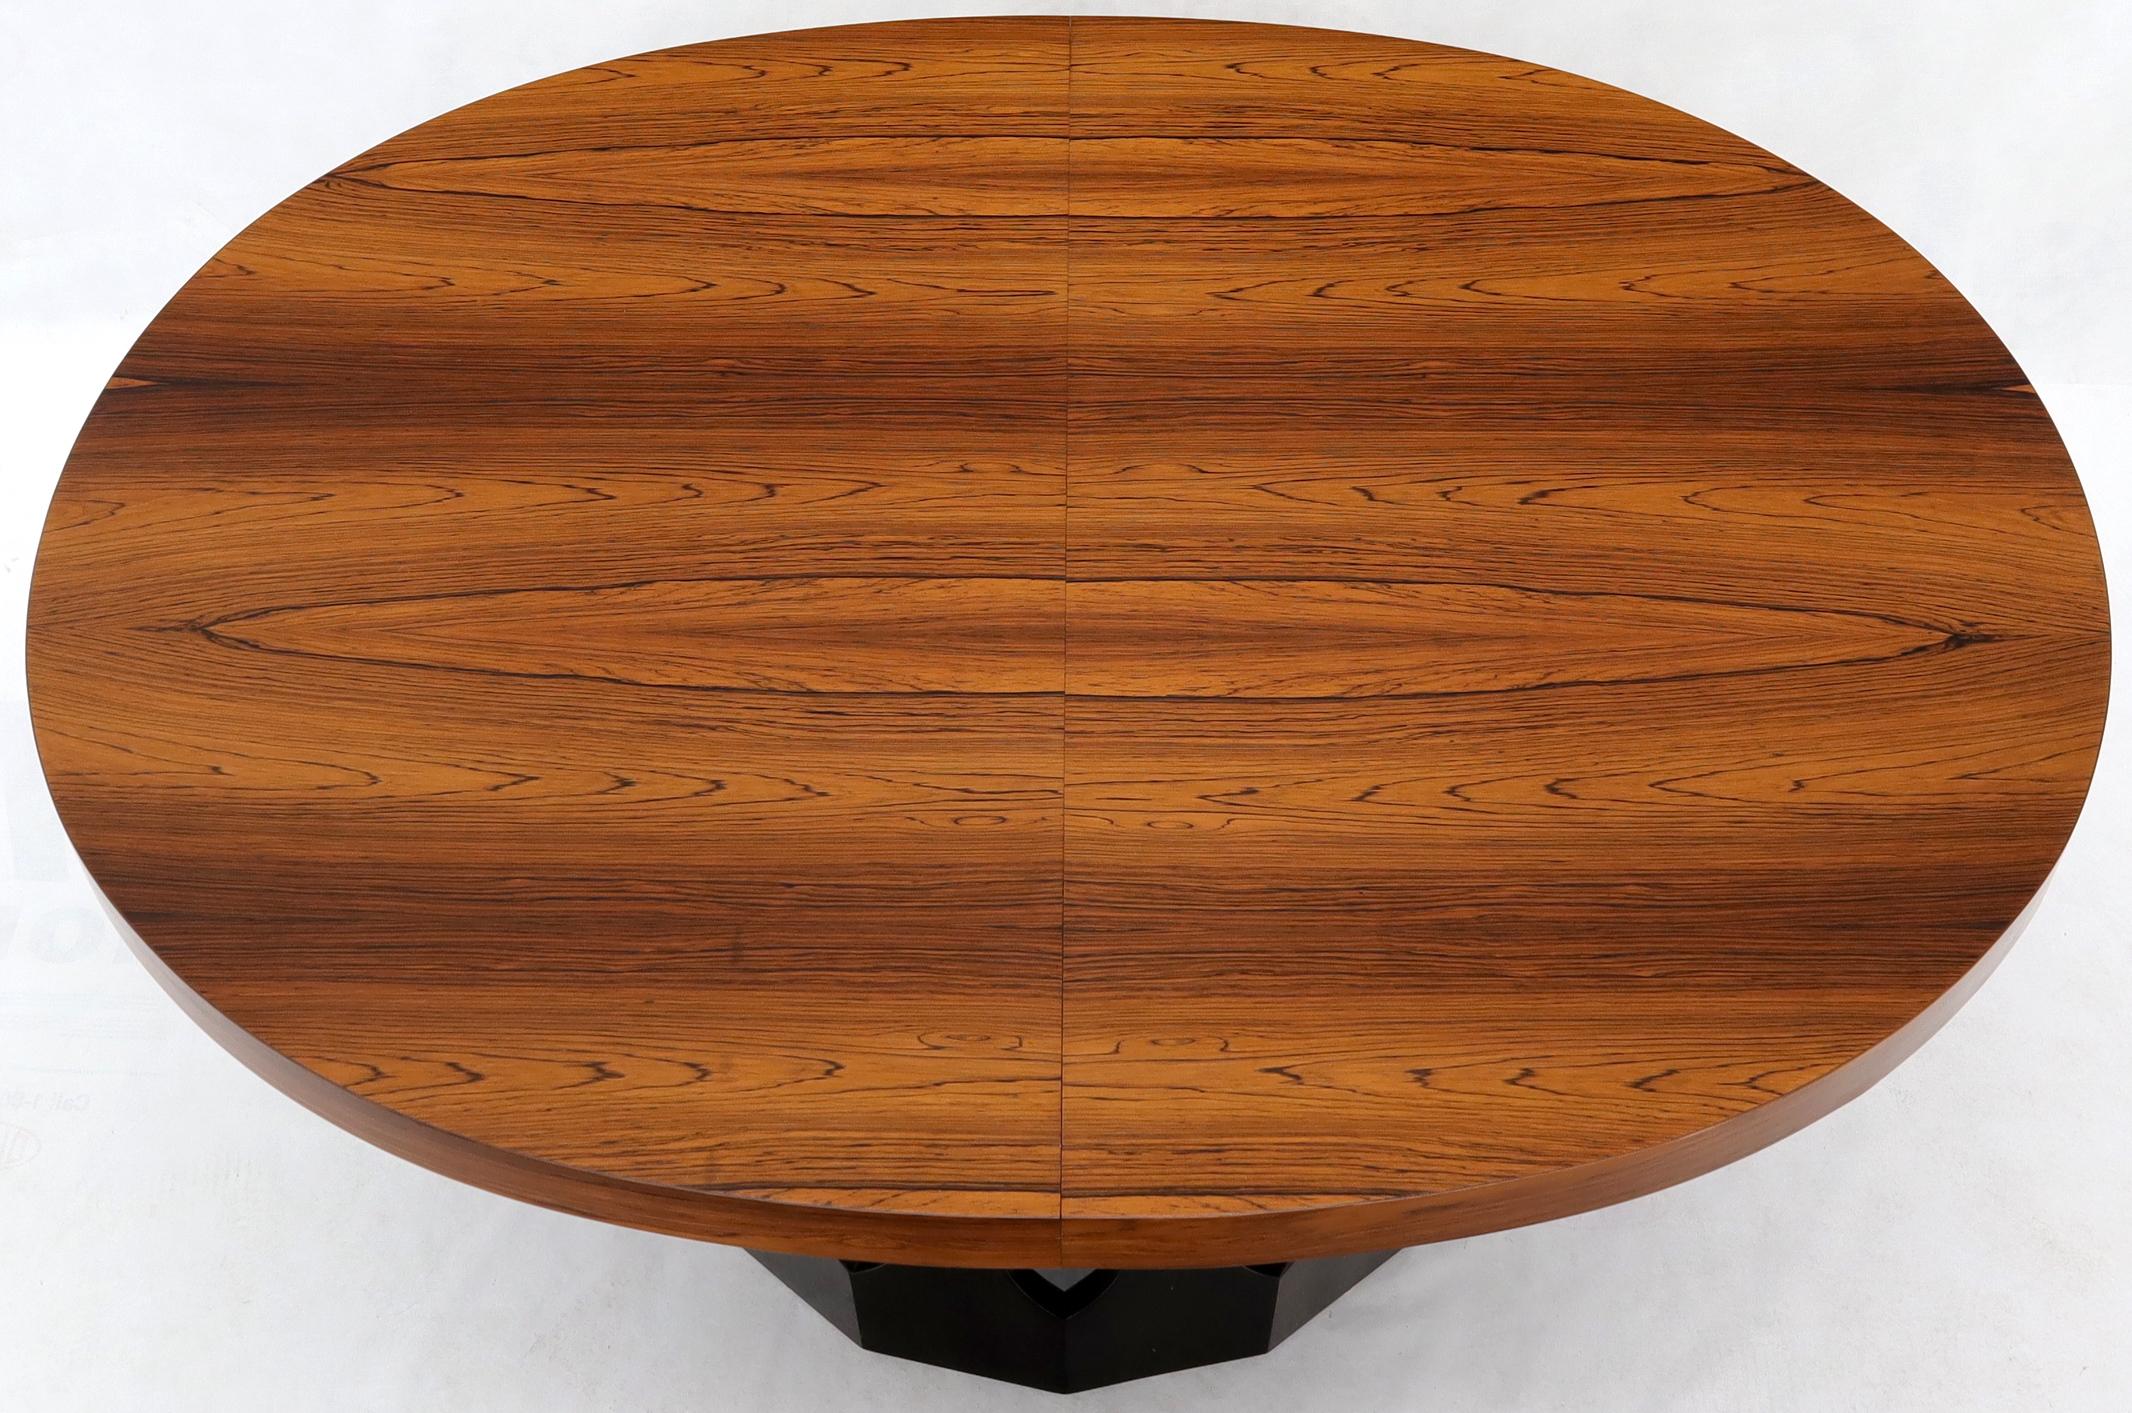 American Oval Rosewood Ebonized Solid Mahogany Base Dining Table by Harvey Probber 2 Leaf